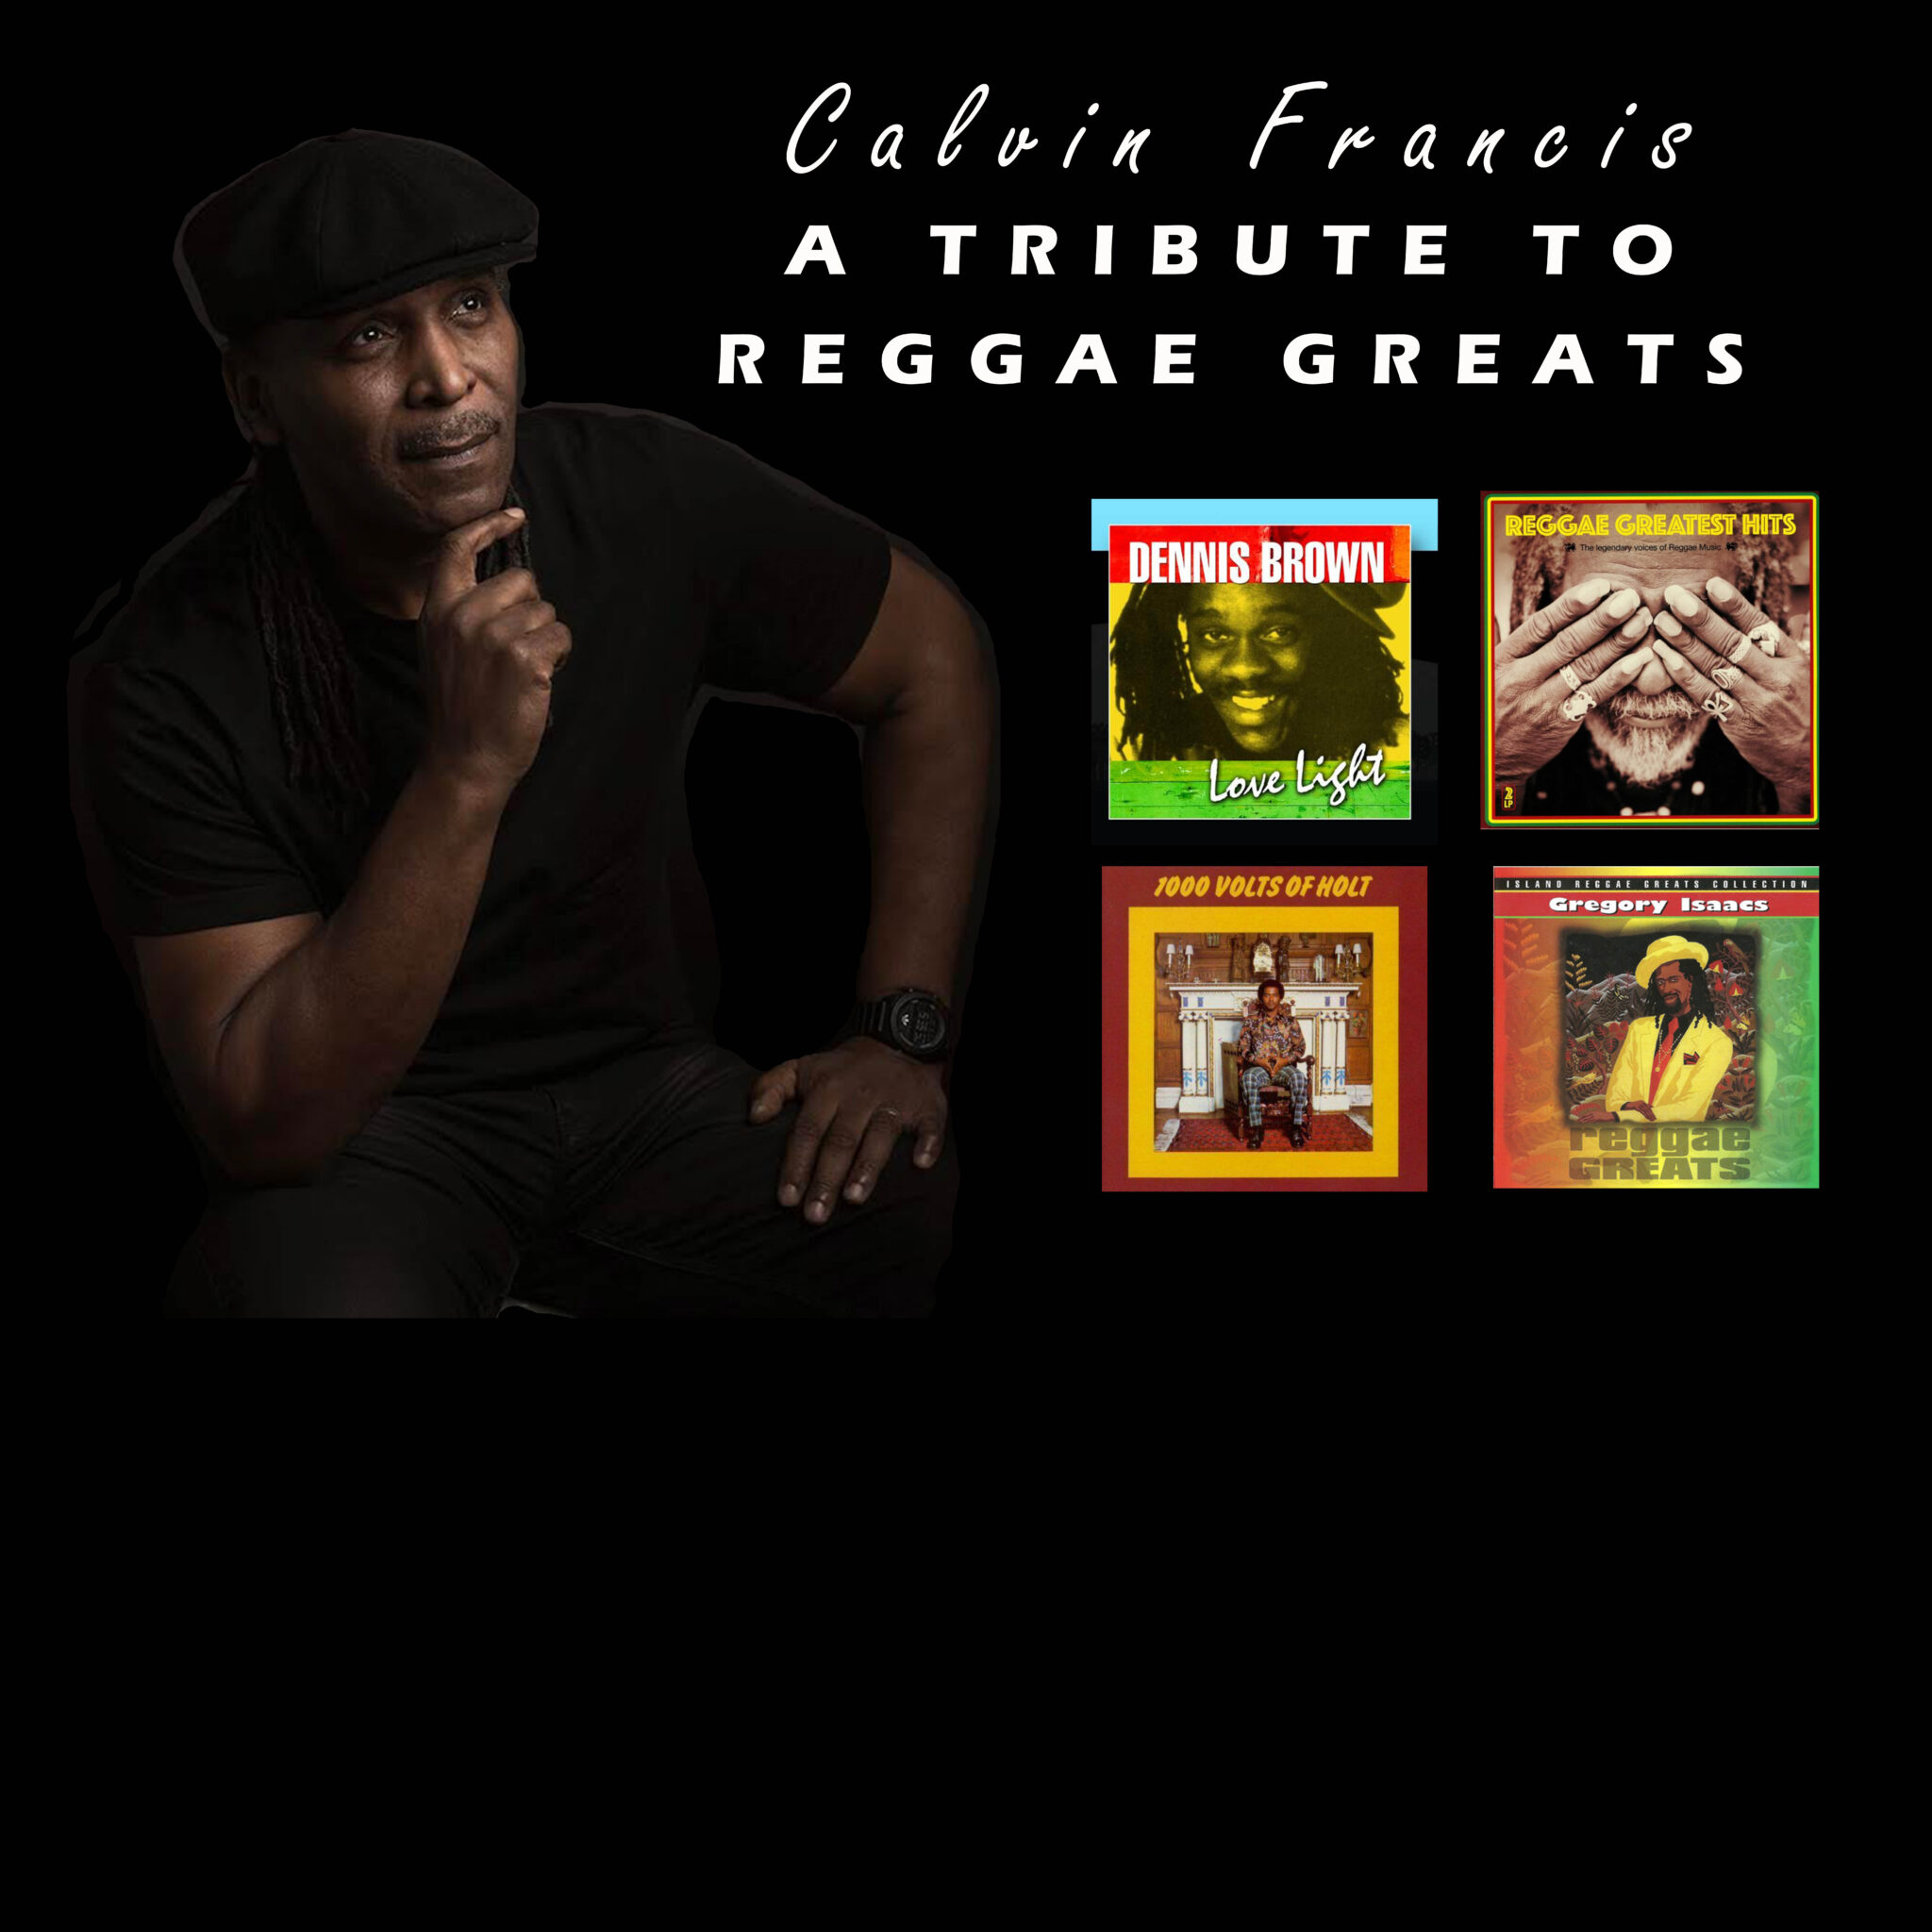 A Tribute to Reggae Greats with Calvin Francis